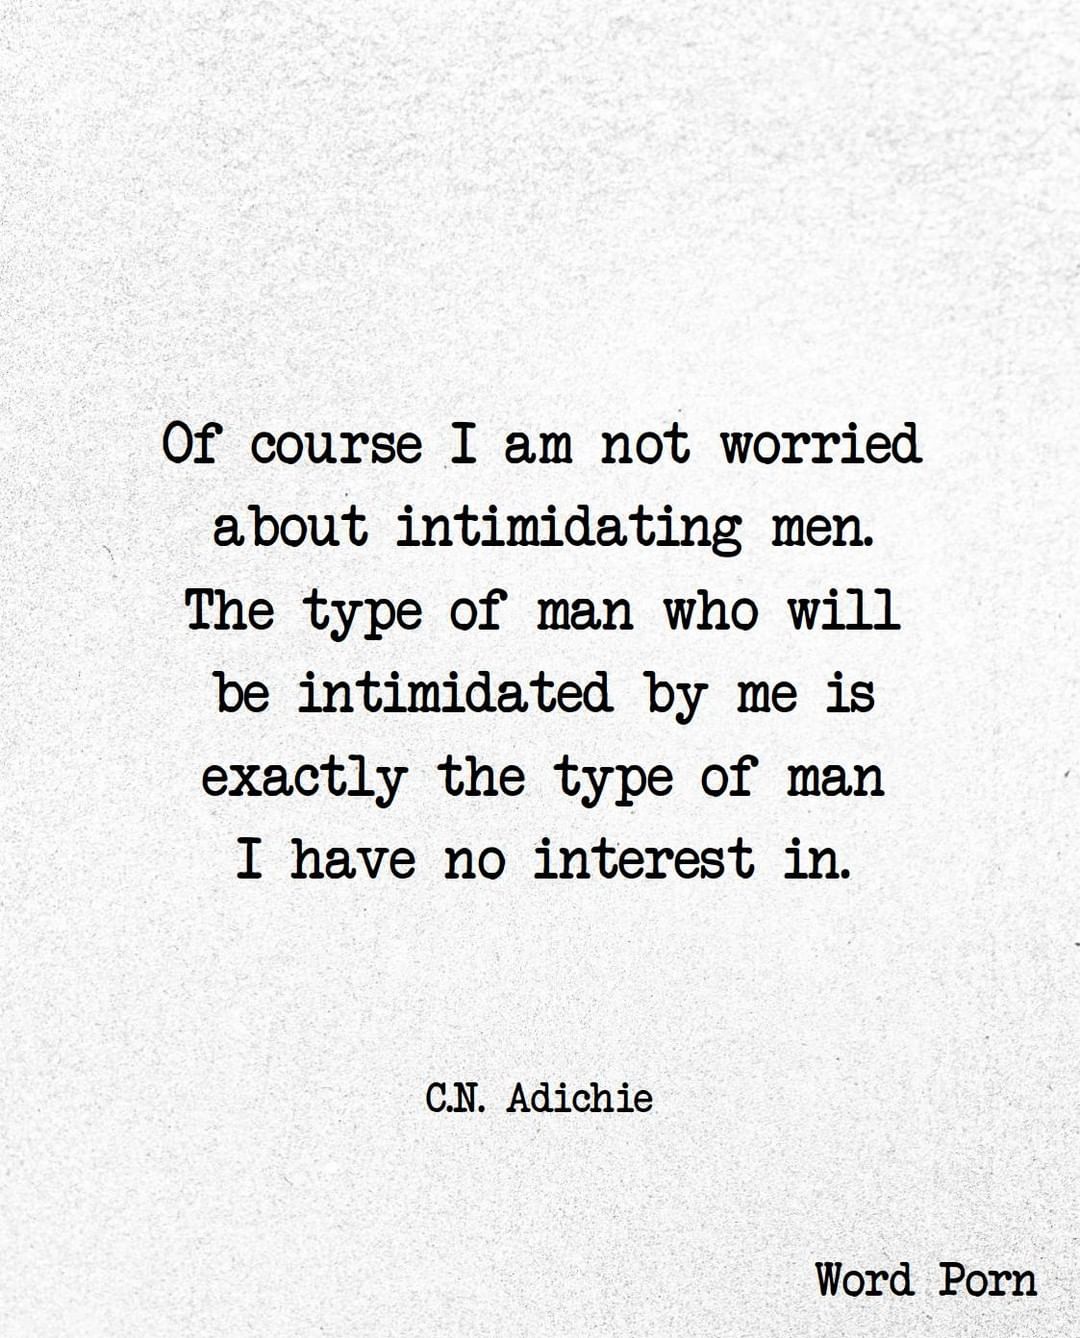 Of course I am not worried about intimidating men. The type of man who will be intimidated by me is exactly the type of man I have no interest in. C.N. Adichie.